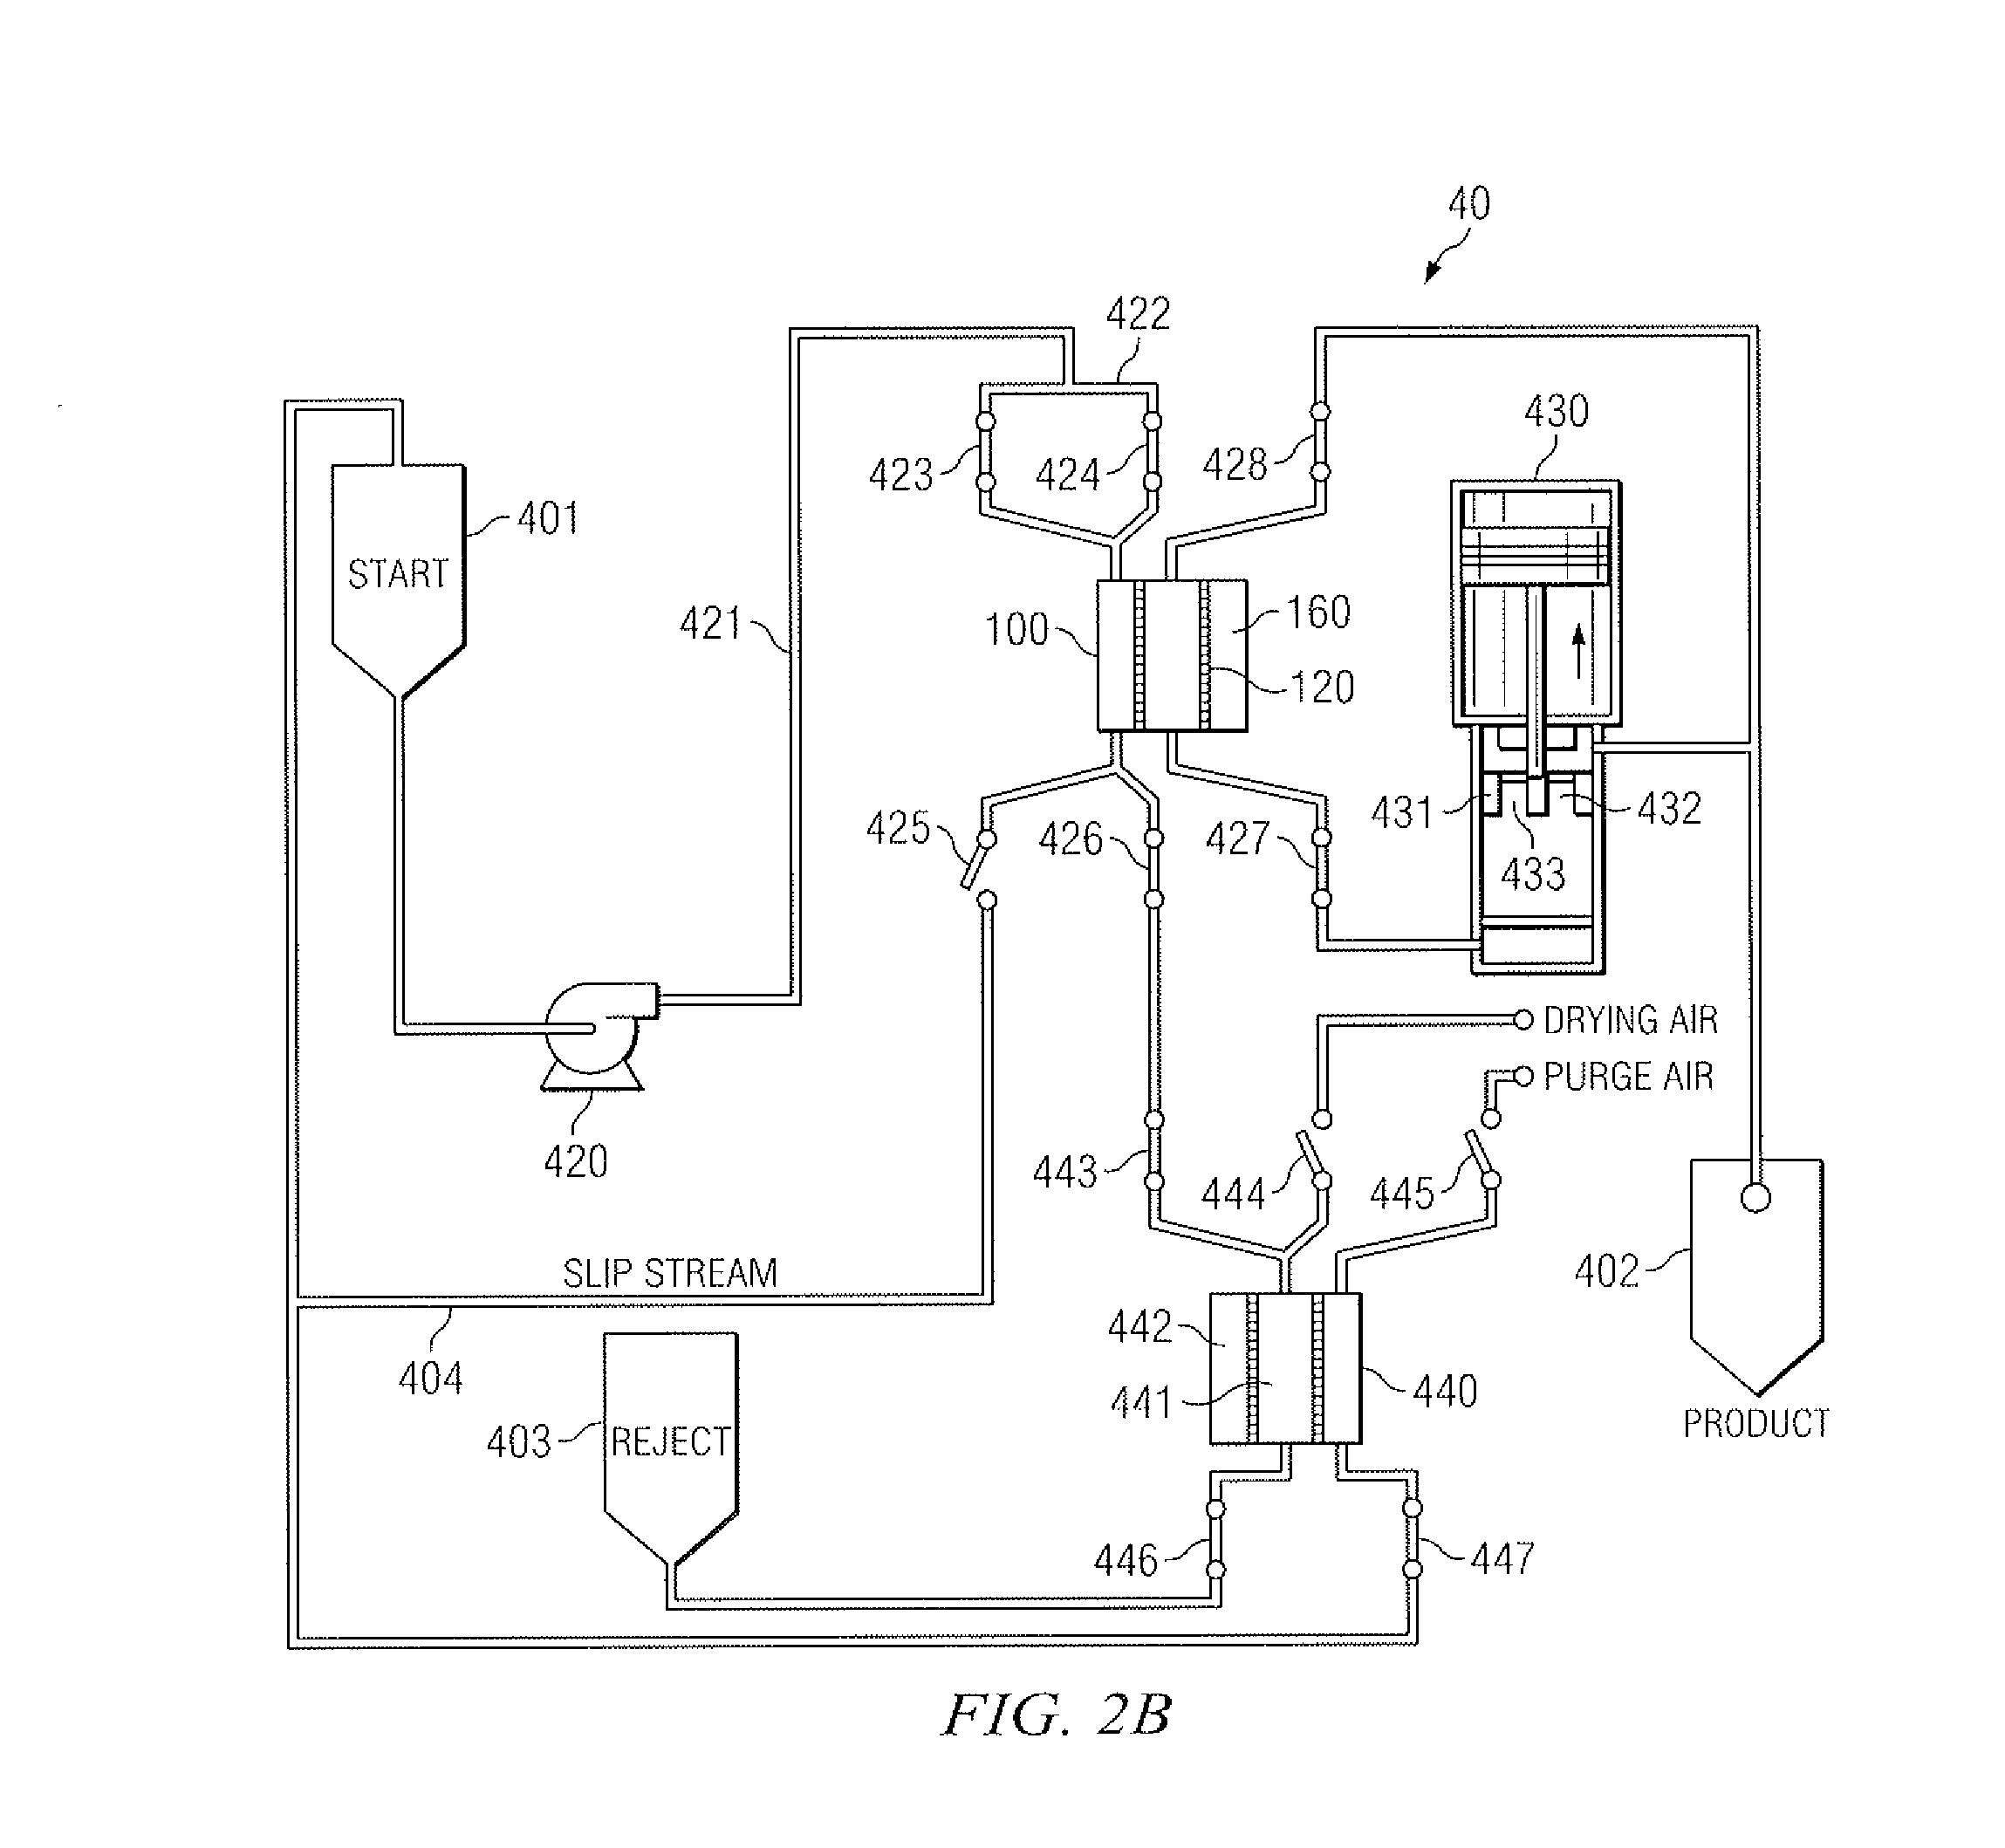 Produced water treatment method and apparatus